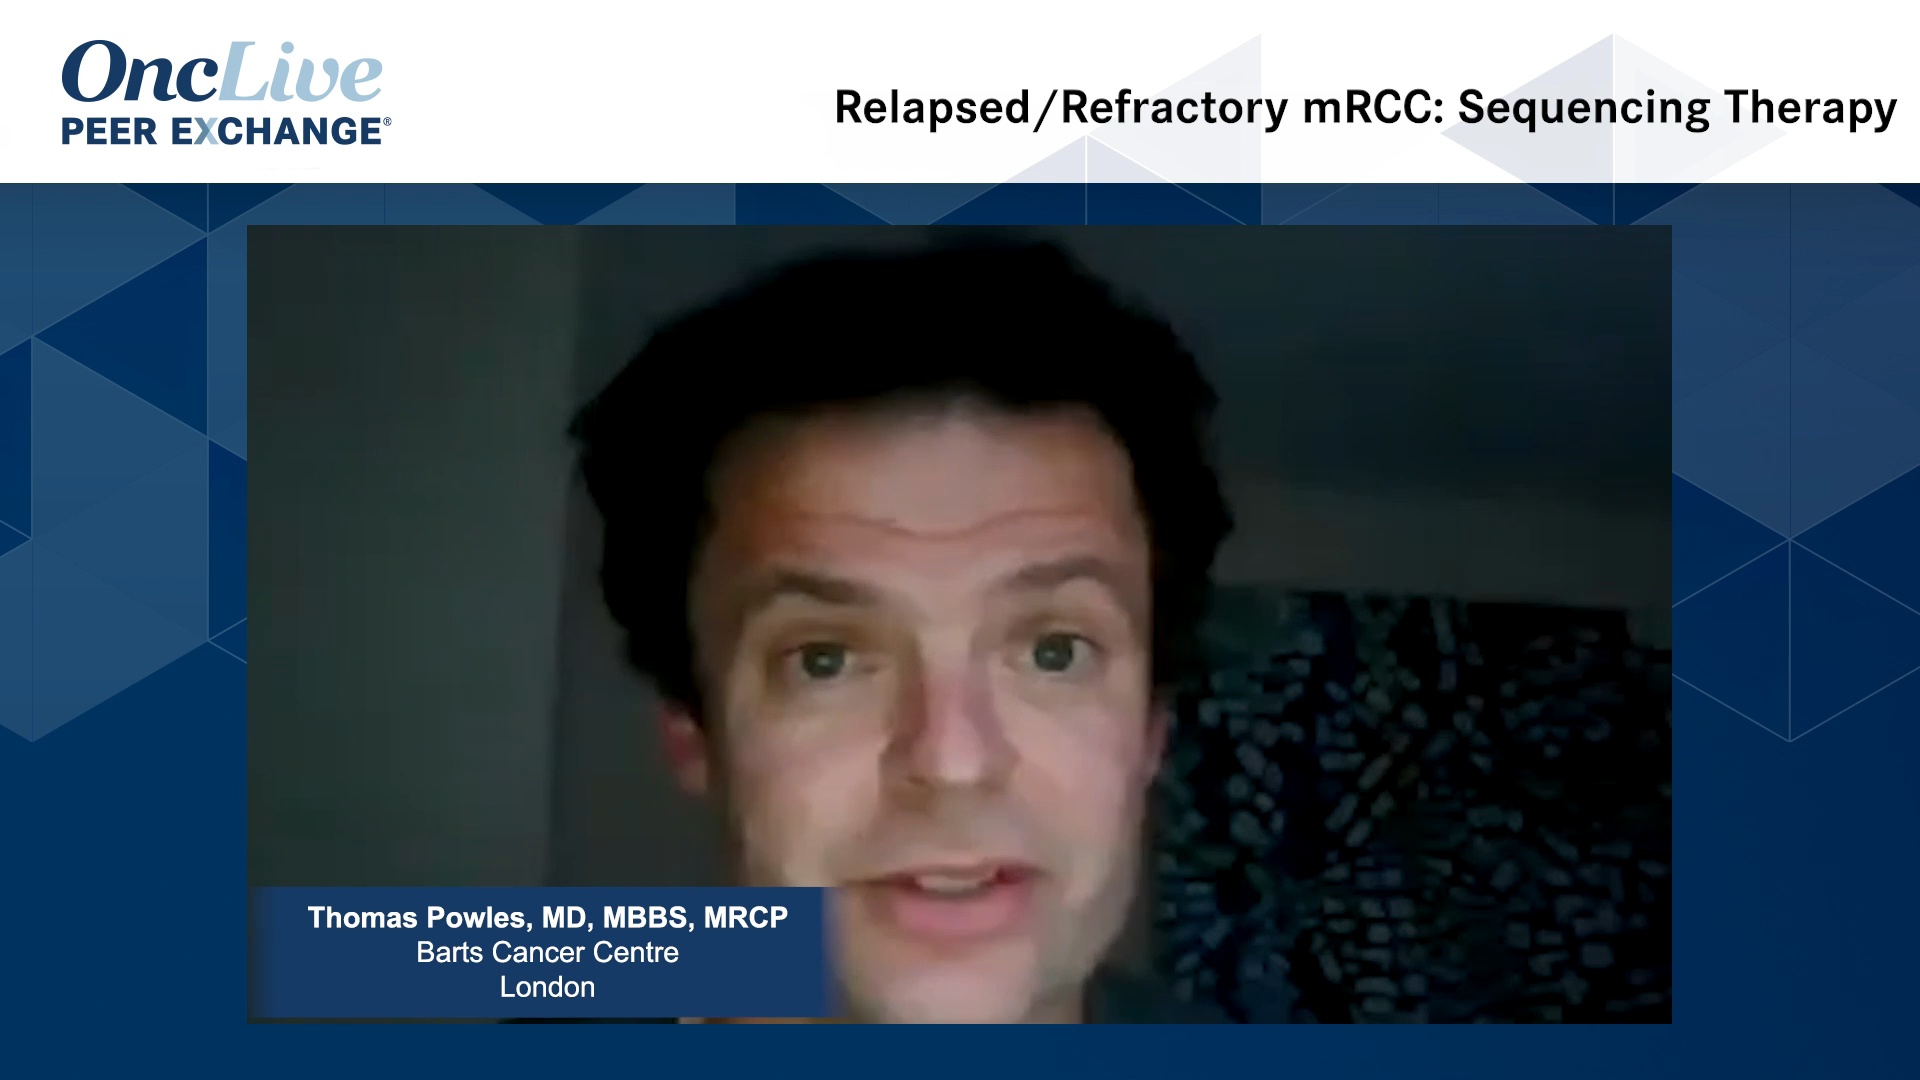 Relapsed/Refractory mRCC: Sequencing Therapy